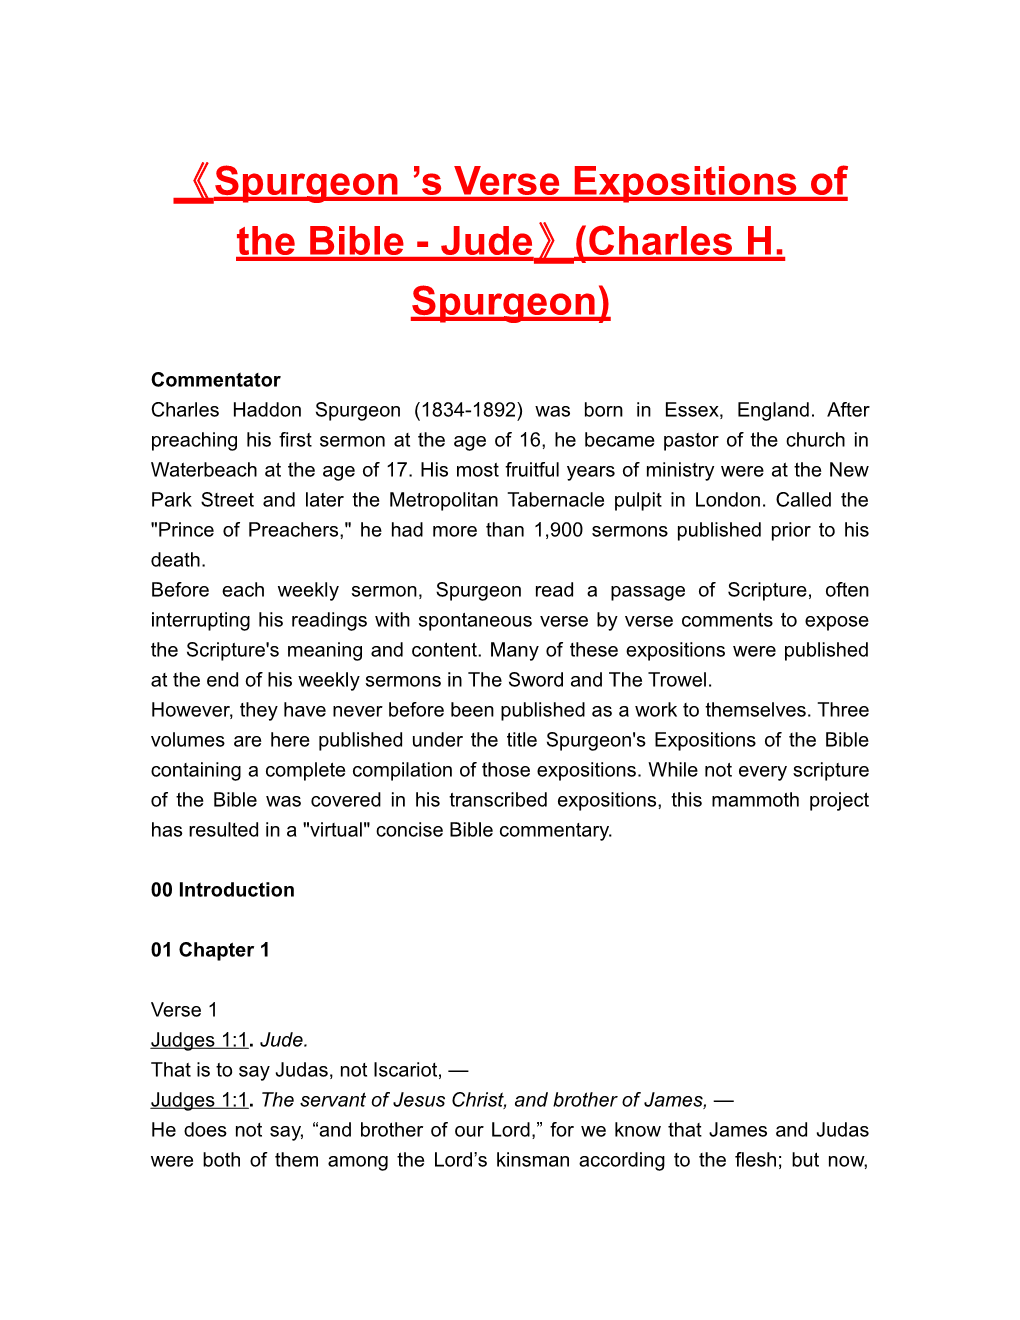 Spurgeon S Verse Expositions of the Bible - Jude (Charles H. Spurgeon)